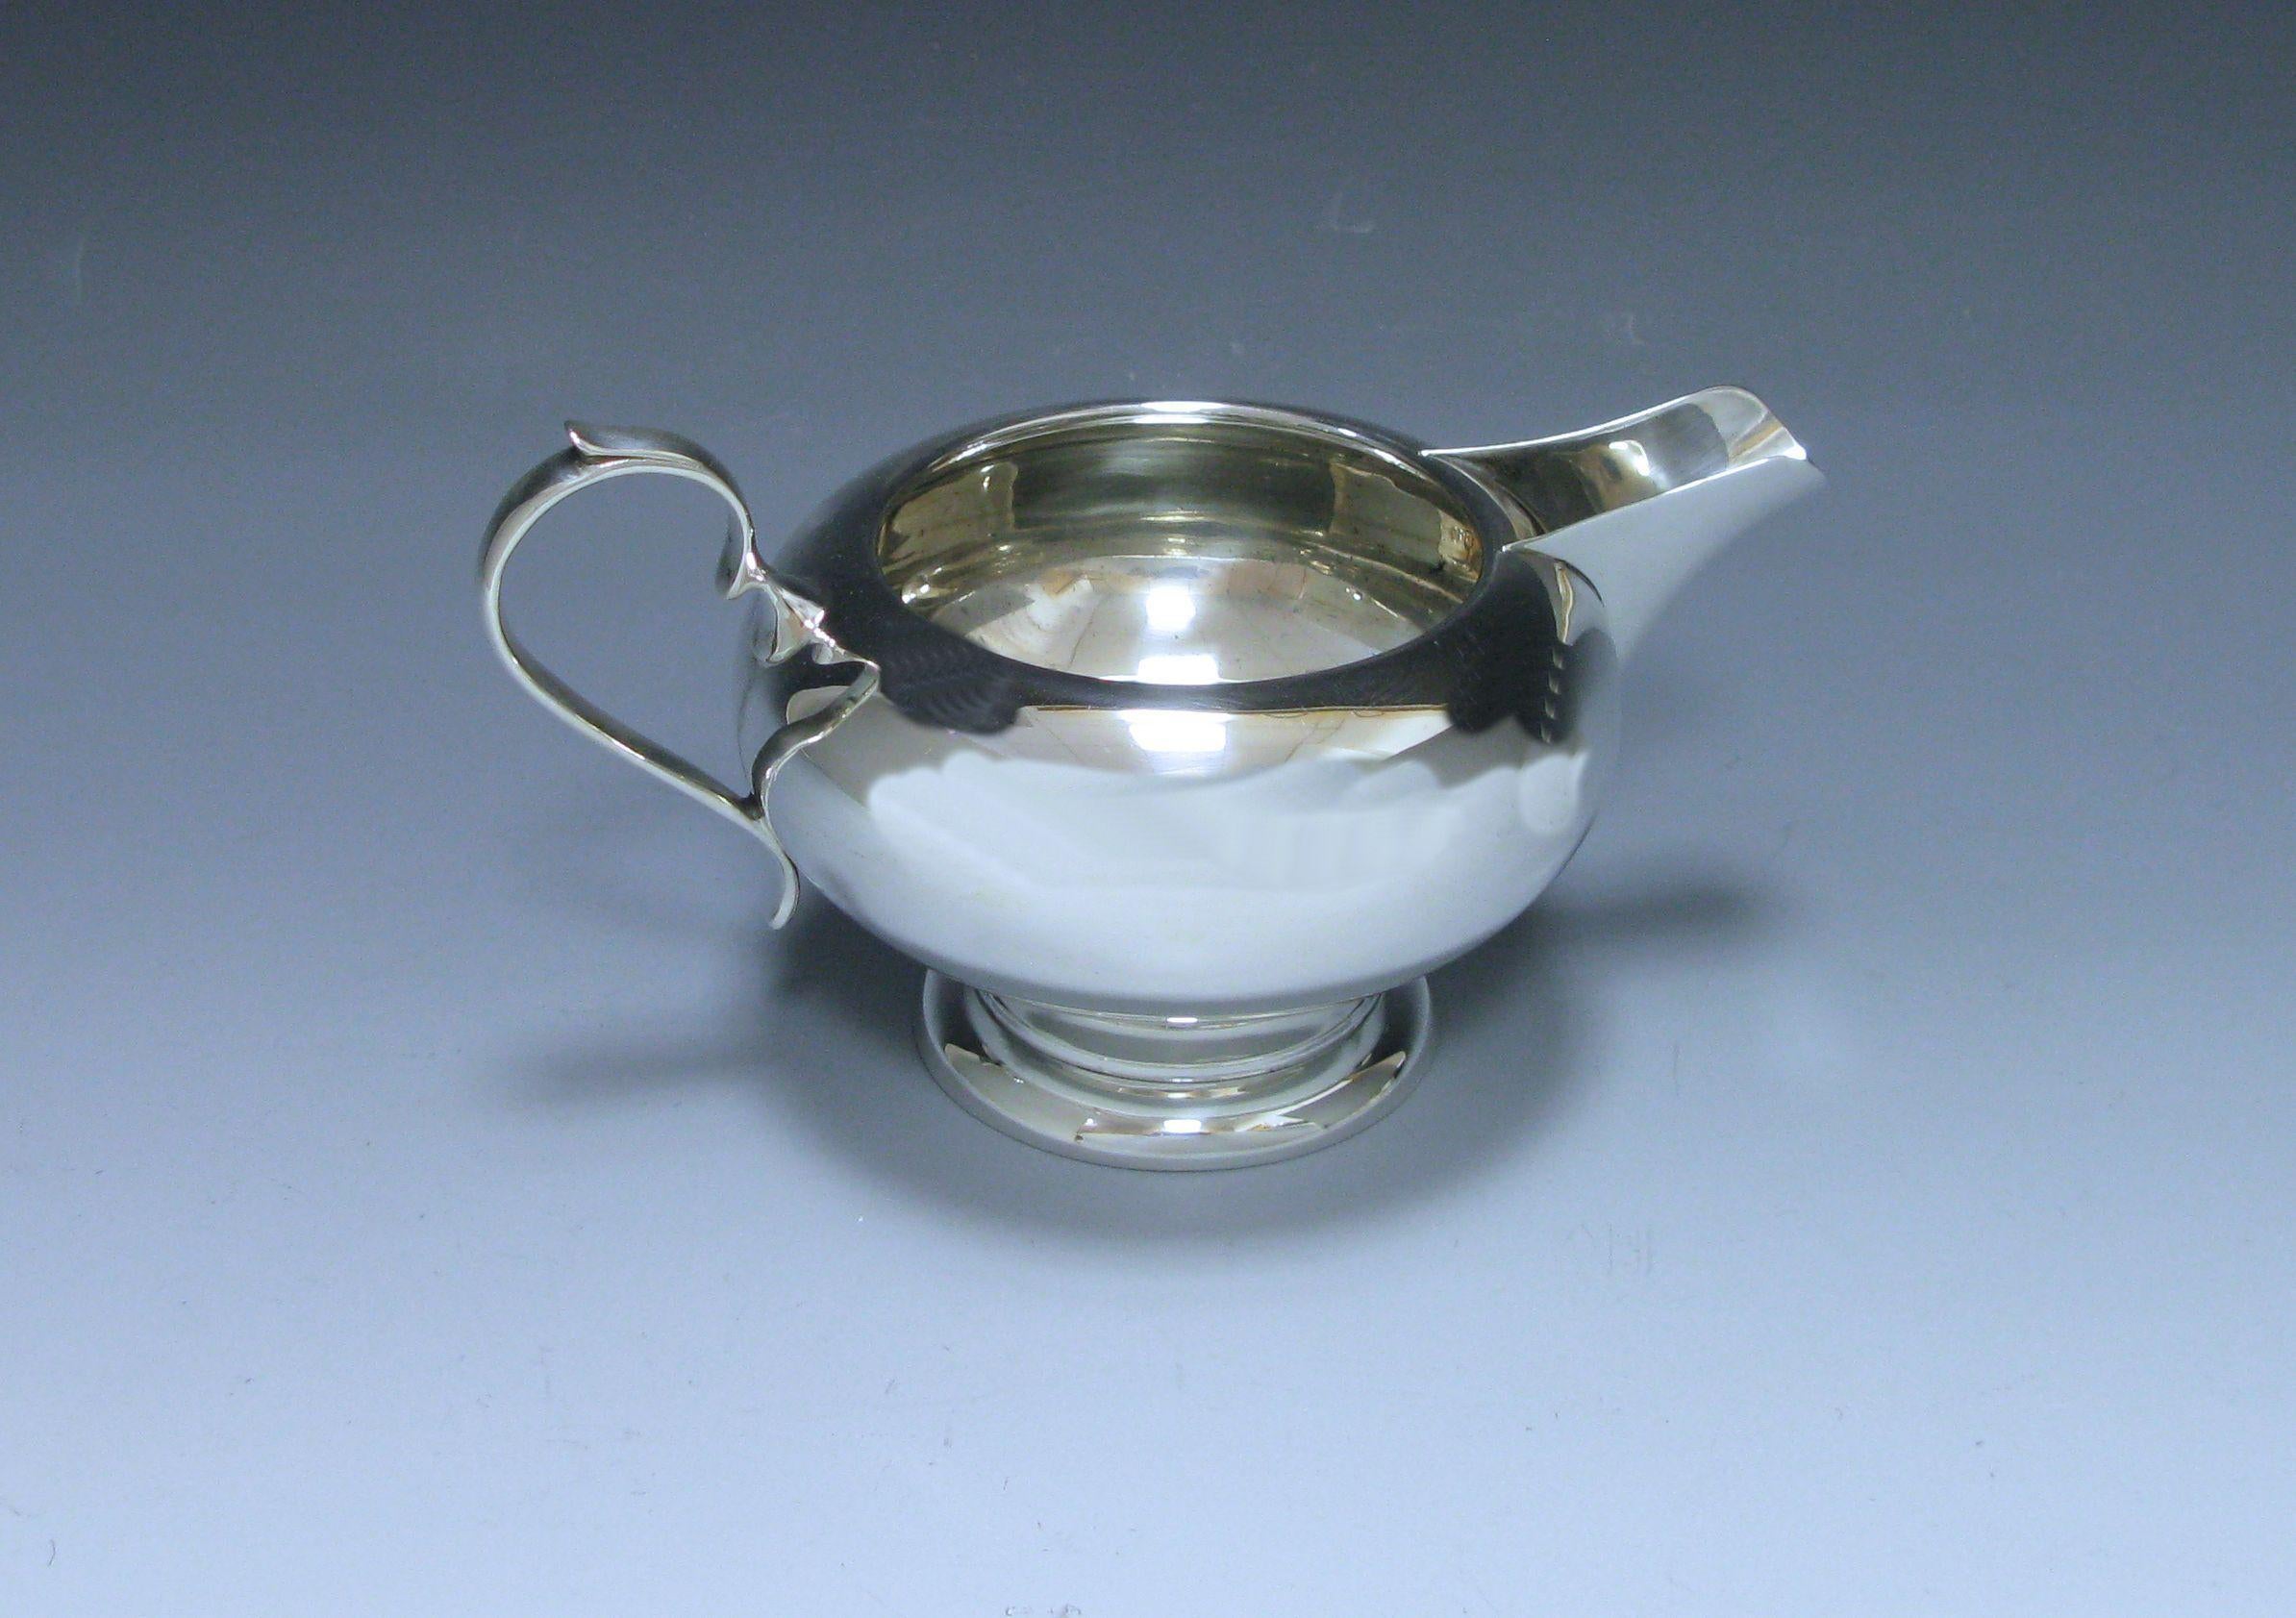 A stylish sterling George V silver four-piece tea and coffee service which is of plain unembellished baluster form. The teapot and coffee pot both have wooden handles and finials. By Charles Green & Co. Birmingham 1929-1930. 

Measures: Height of